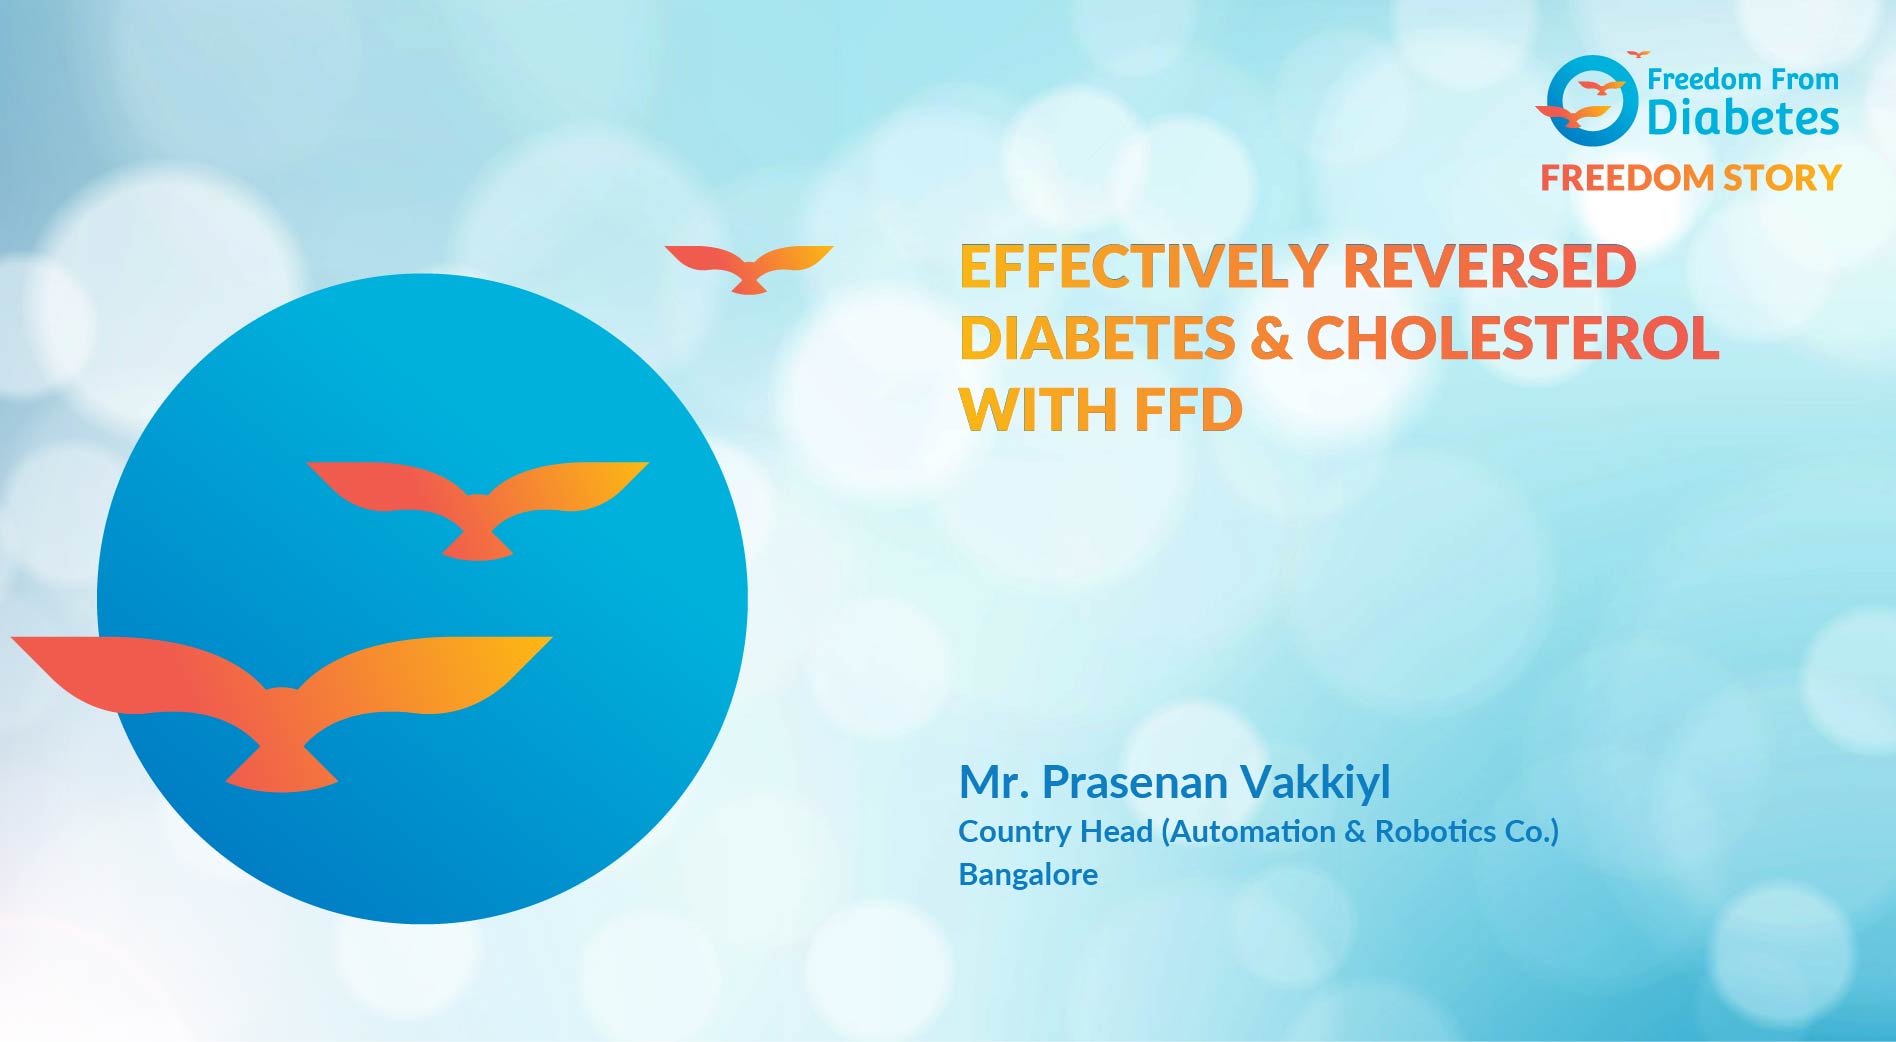 An inspirational diabetes reversal story from Bangalore